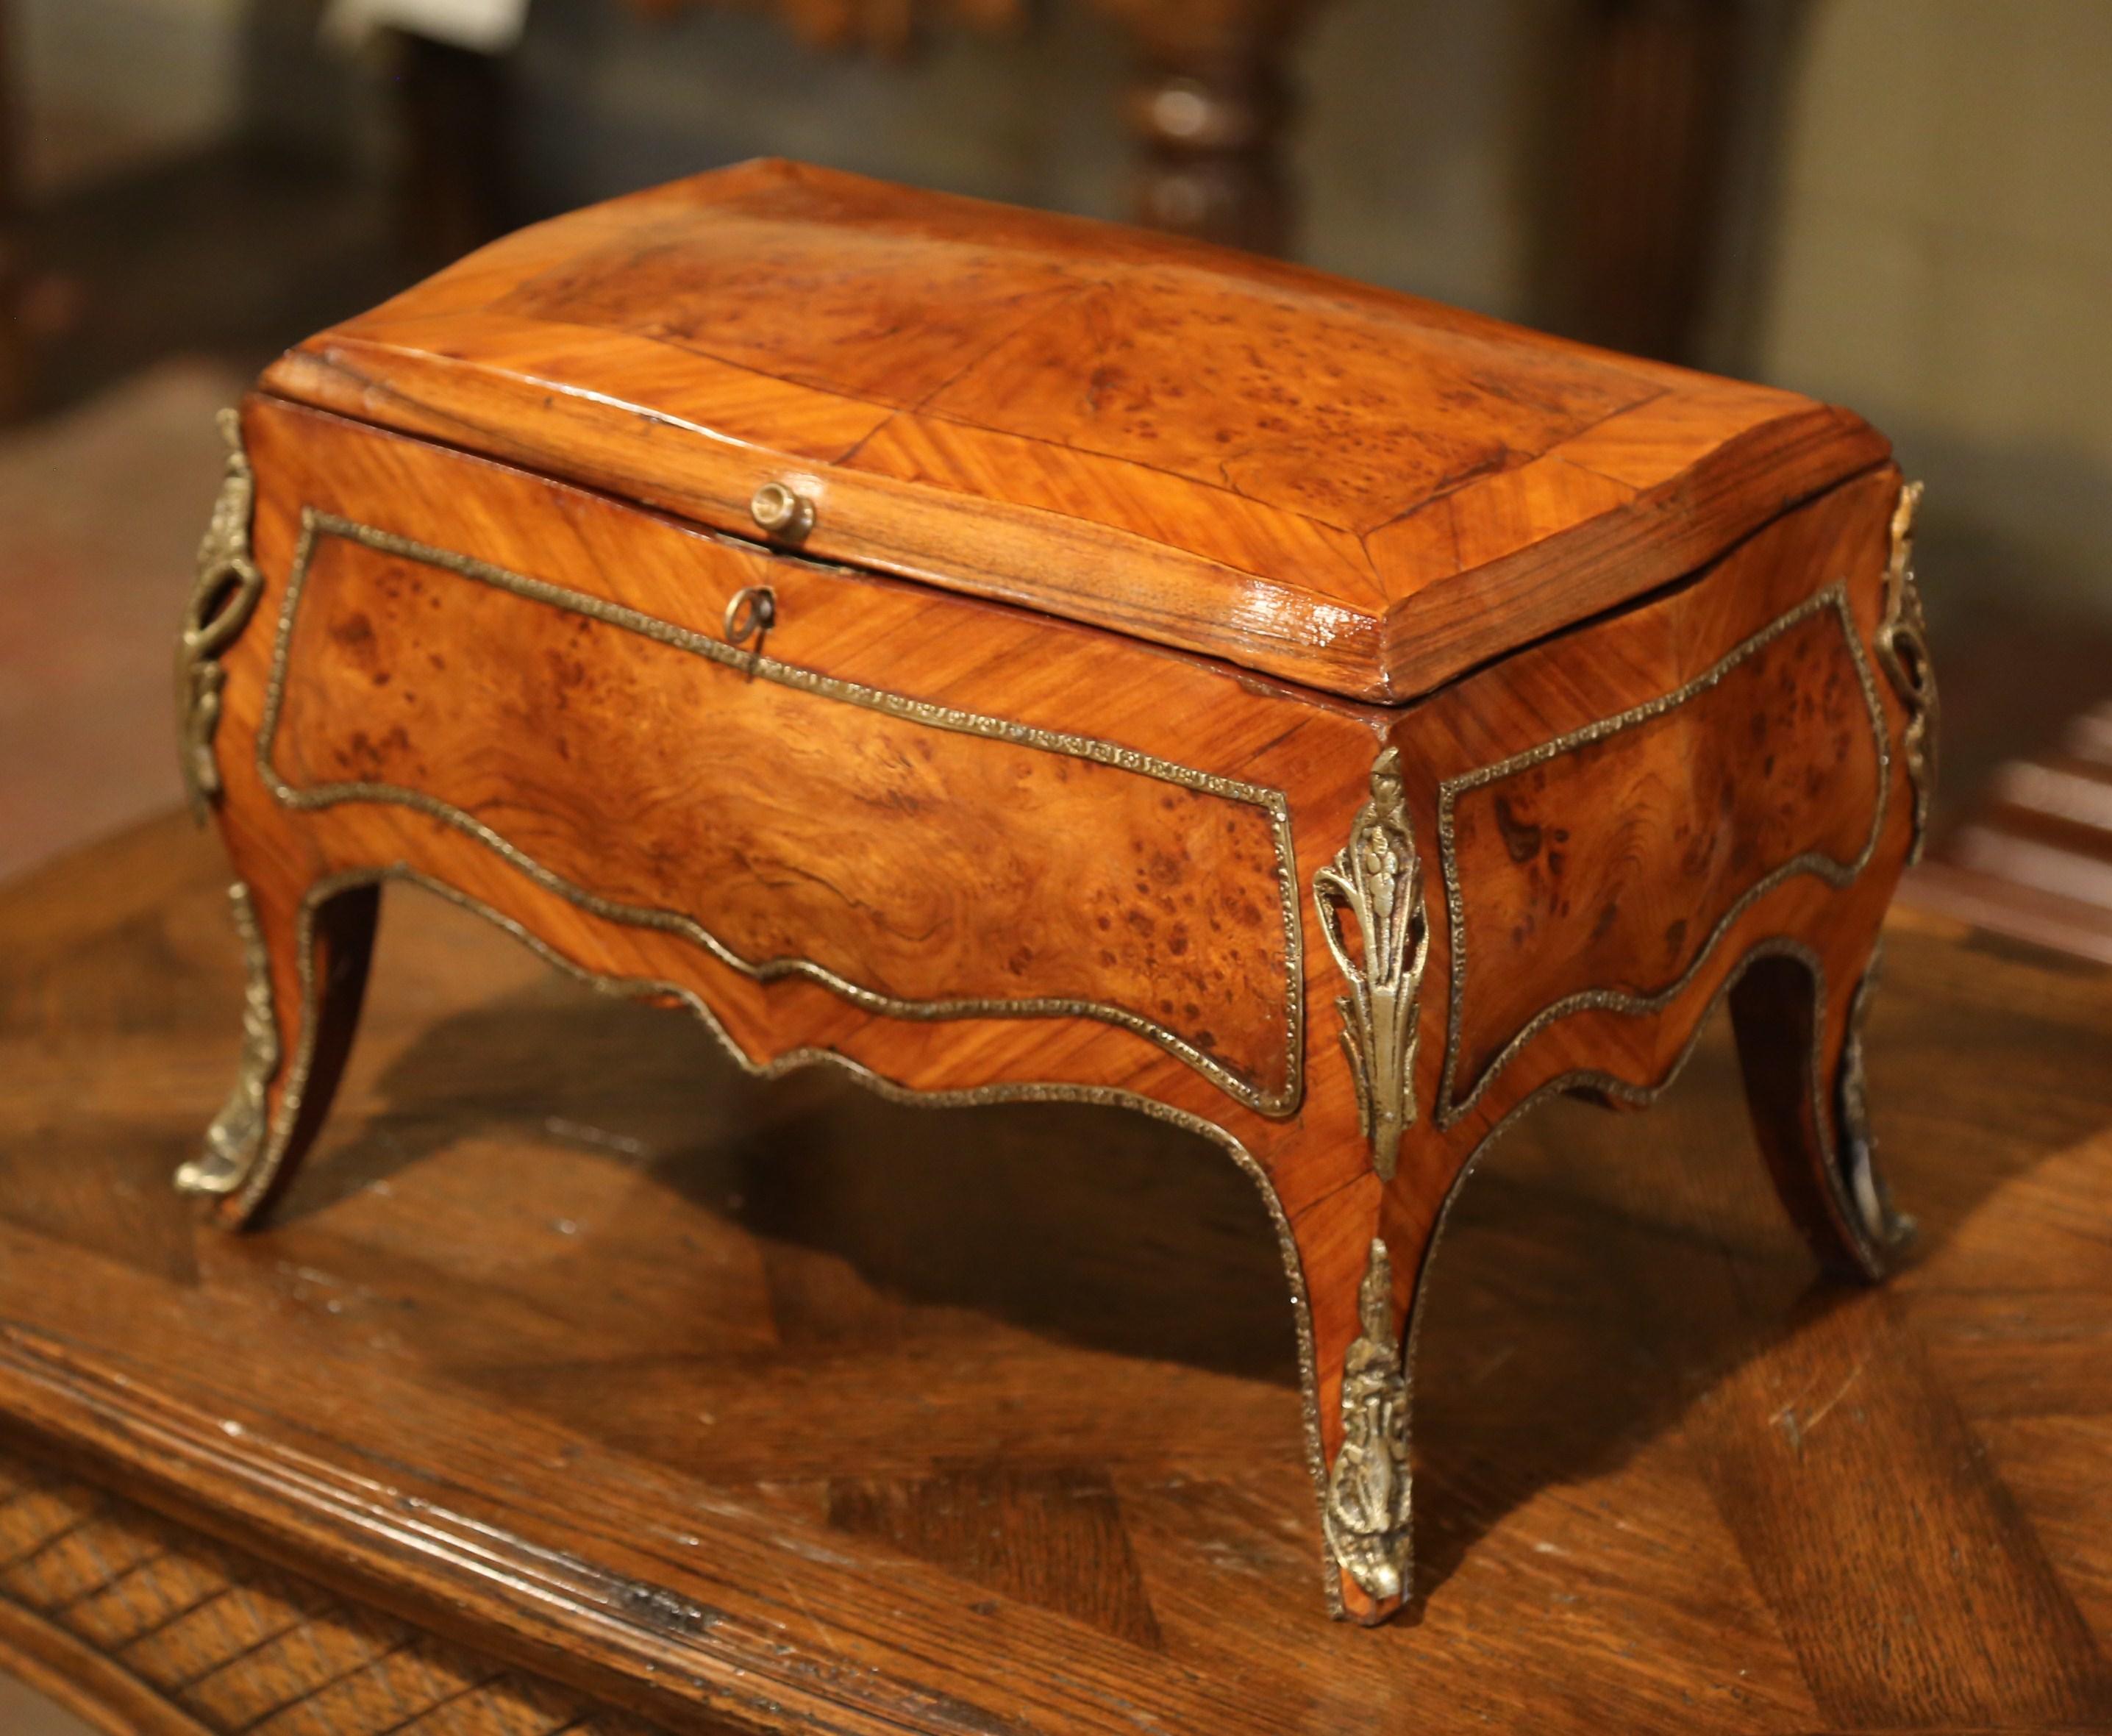 Place this elegant antique fruit wood box in your master bath to keep your jewelry safe and organized. Crafted in France circa 1850, and made of walnut and burl, the small cabinet stands on four cabriole legs decorated with bronze feet covers and